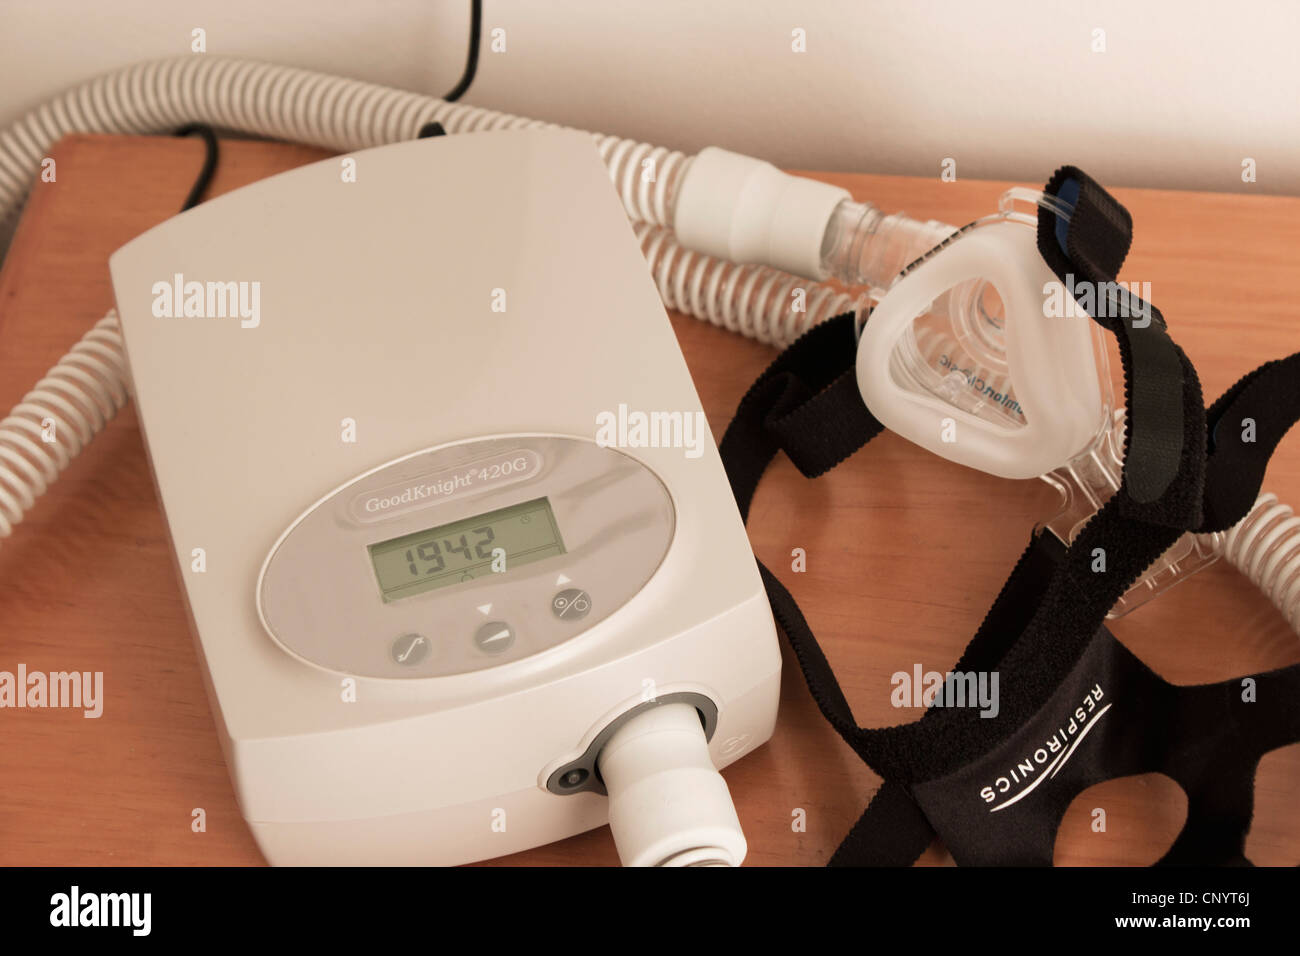 CPAP mask and machine used for the treatment of sleep apnea. Stock Photo